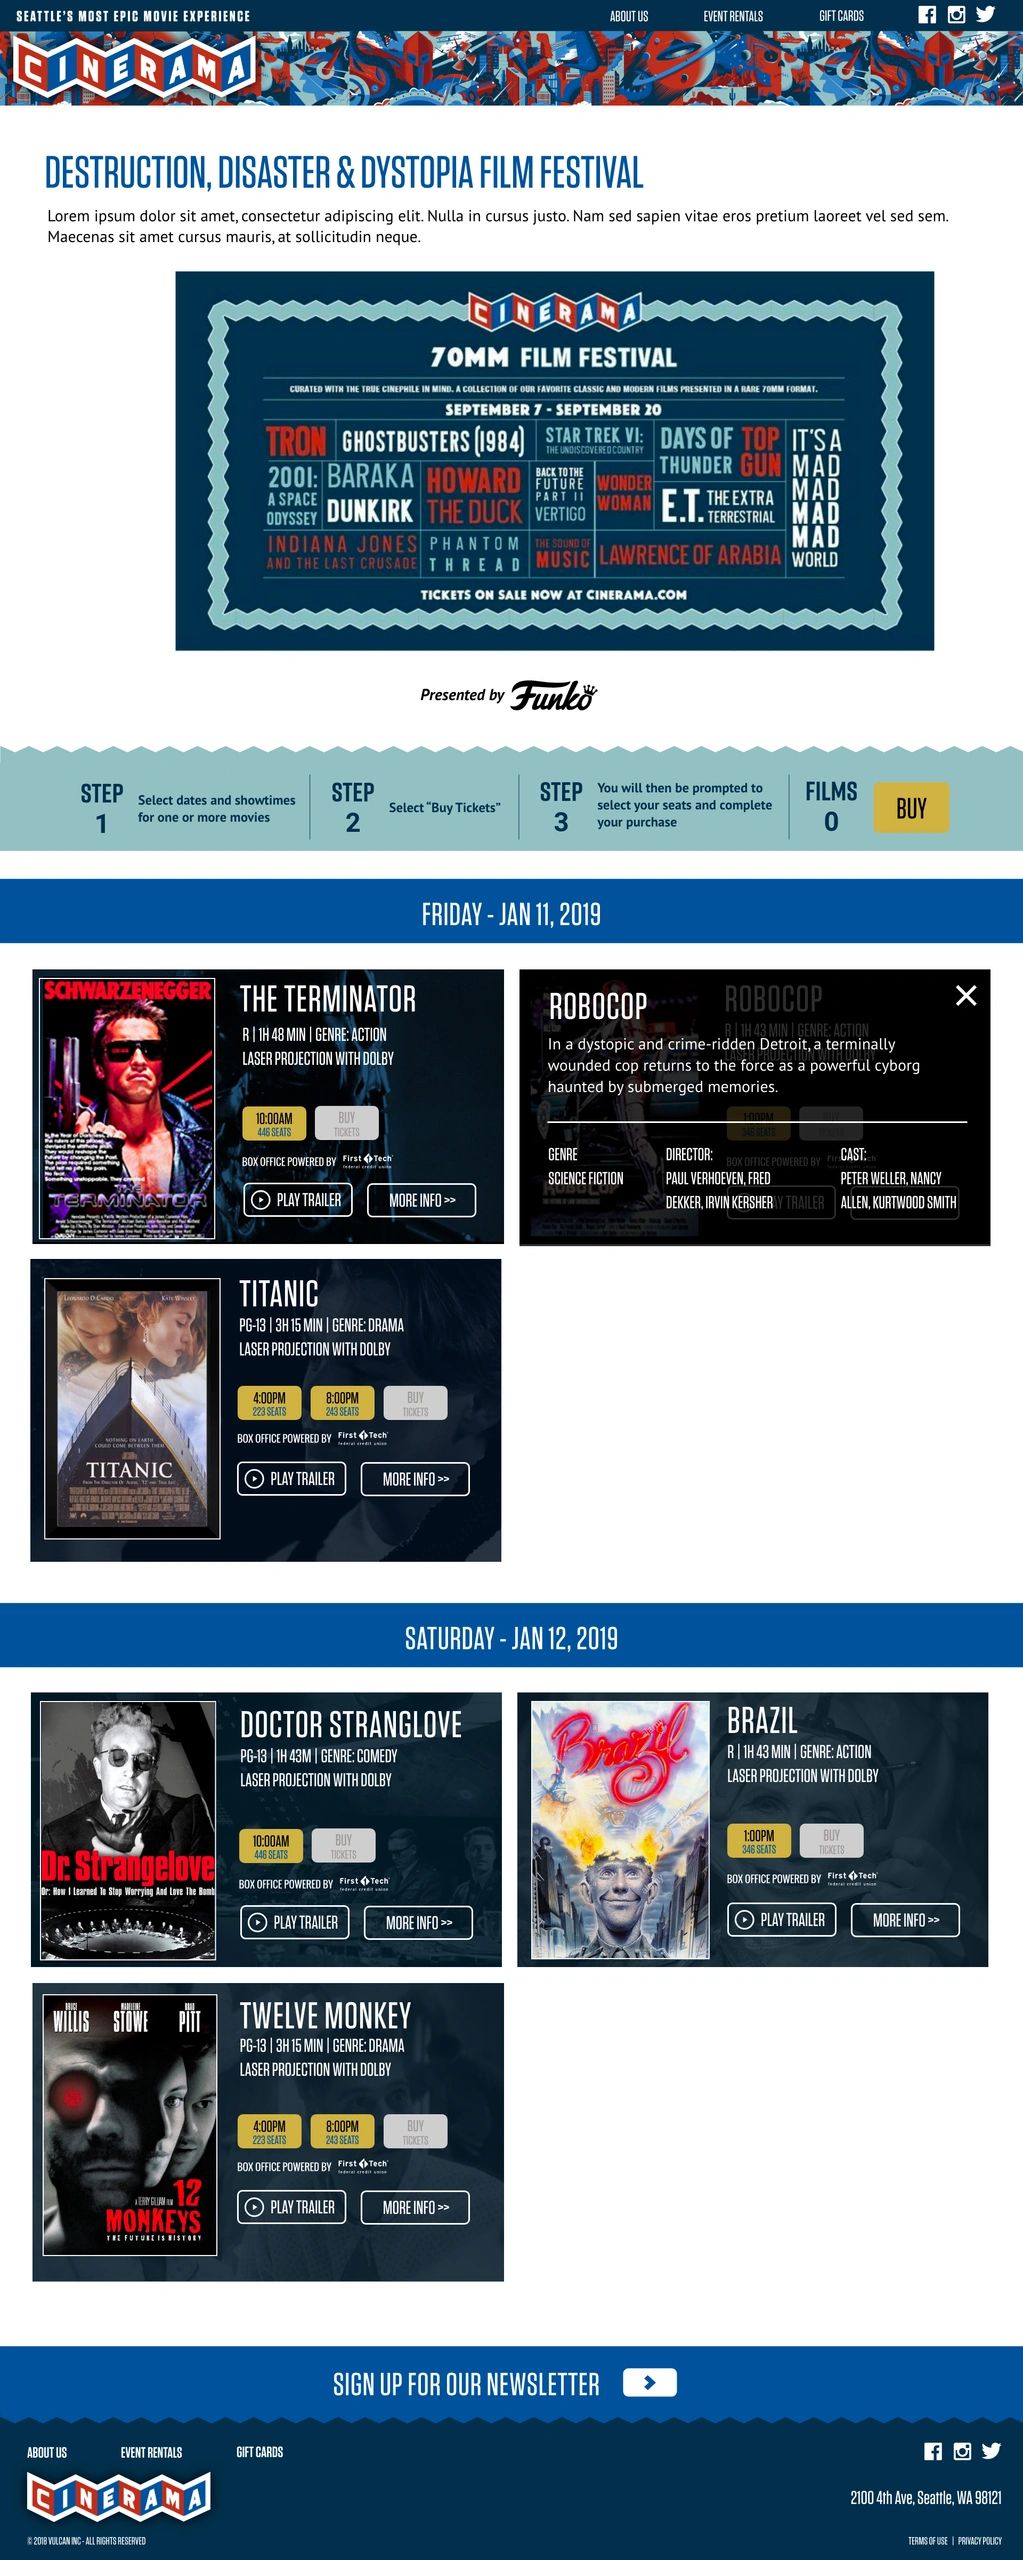 Movie festival page showing the ability to purchase tickets for each movie.